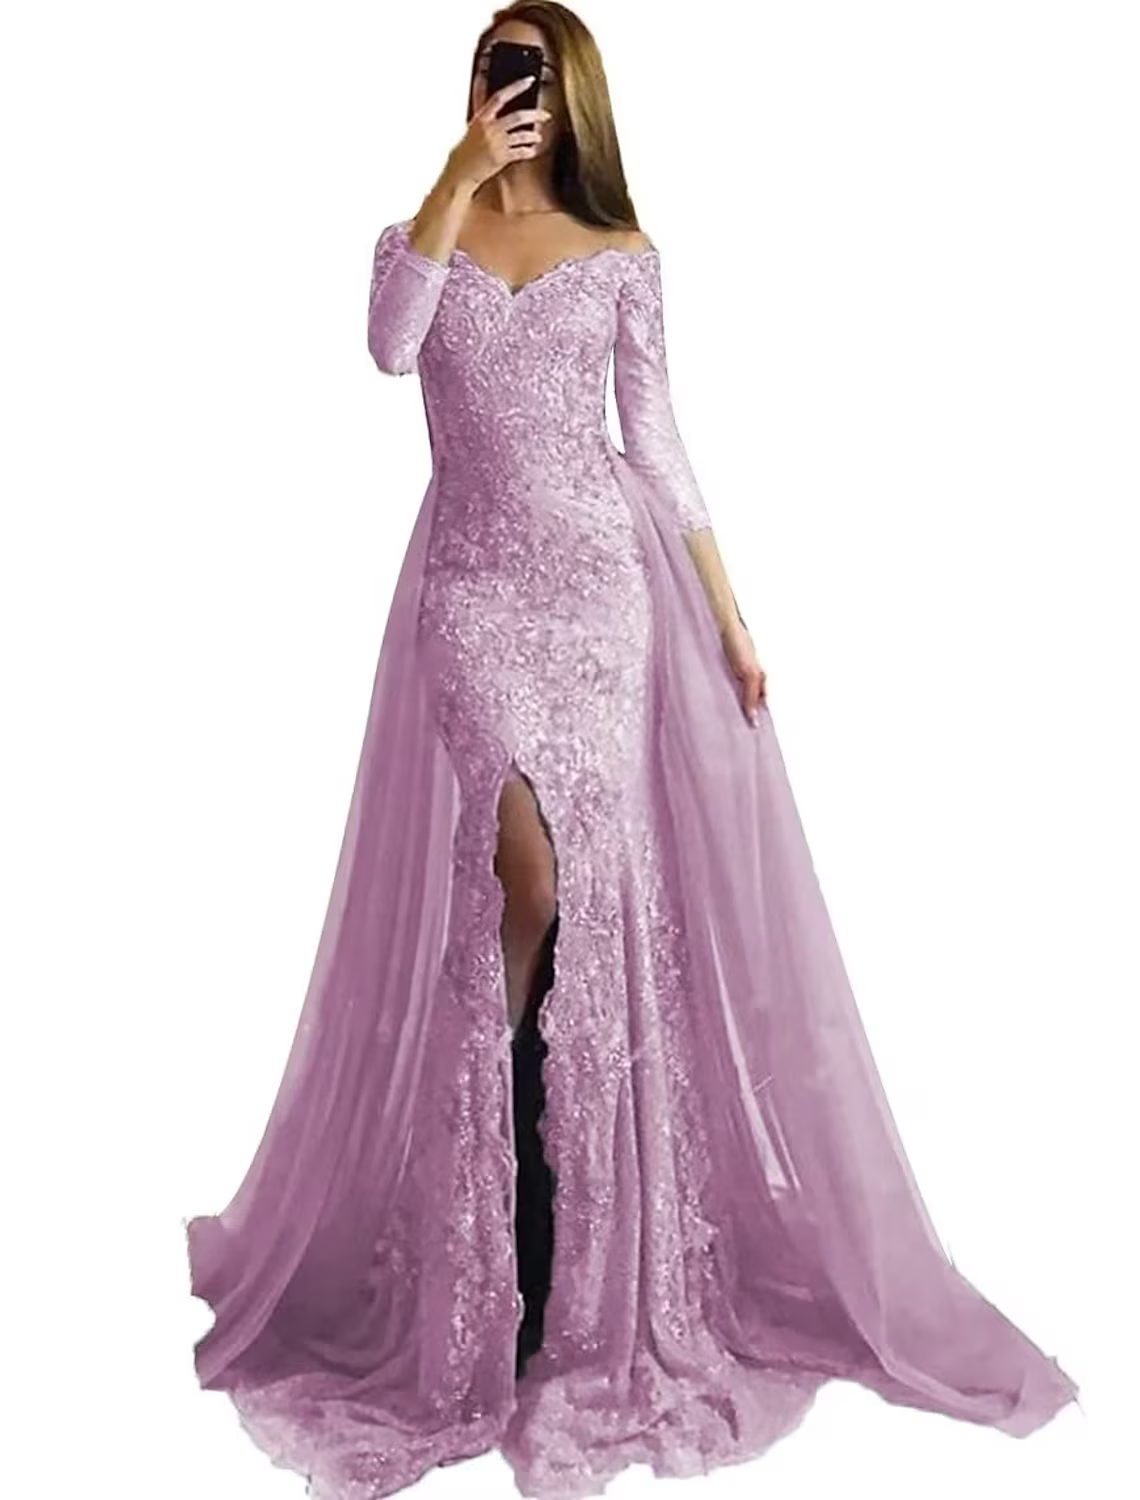 Evening Gown Floral Dress Formal Long Sleeve Off Shoulder Chiffon with Sequin Slit Appliques